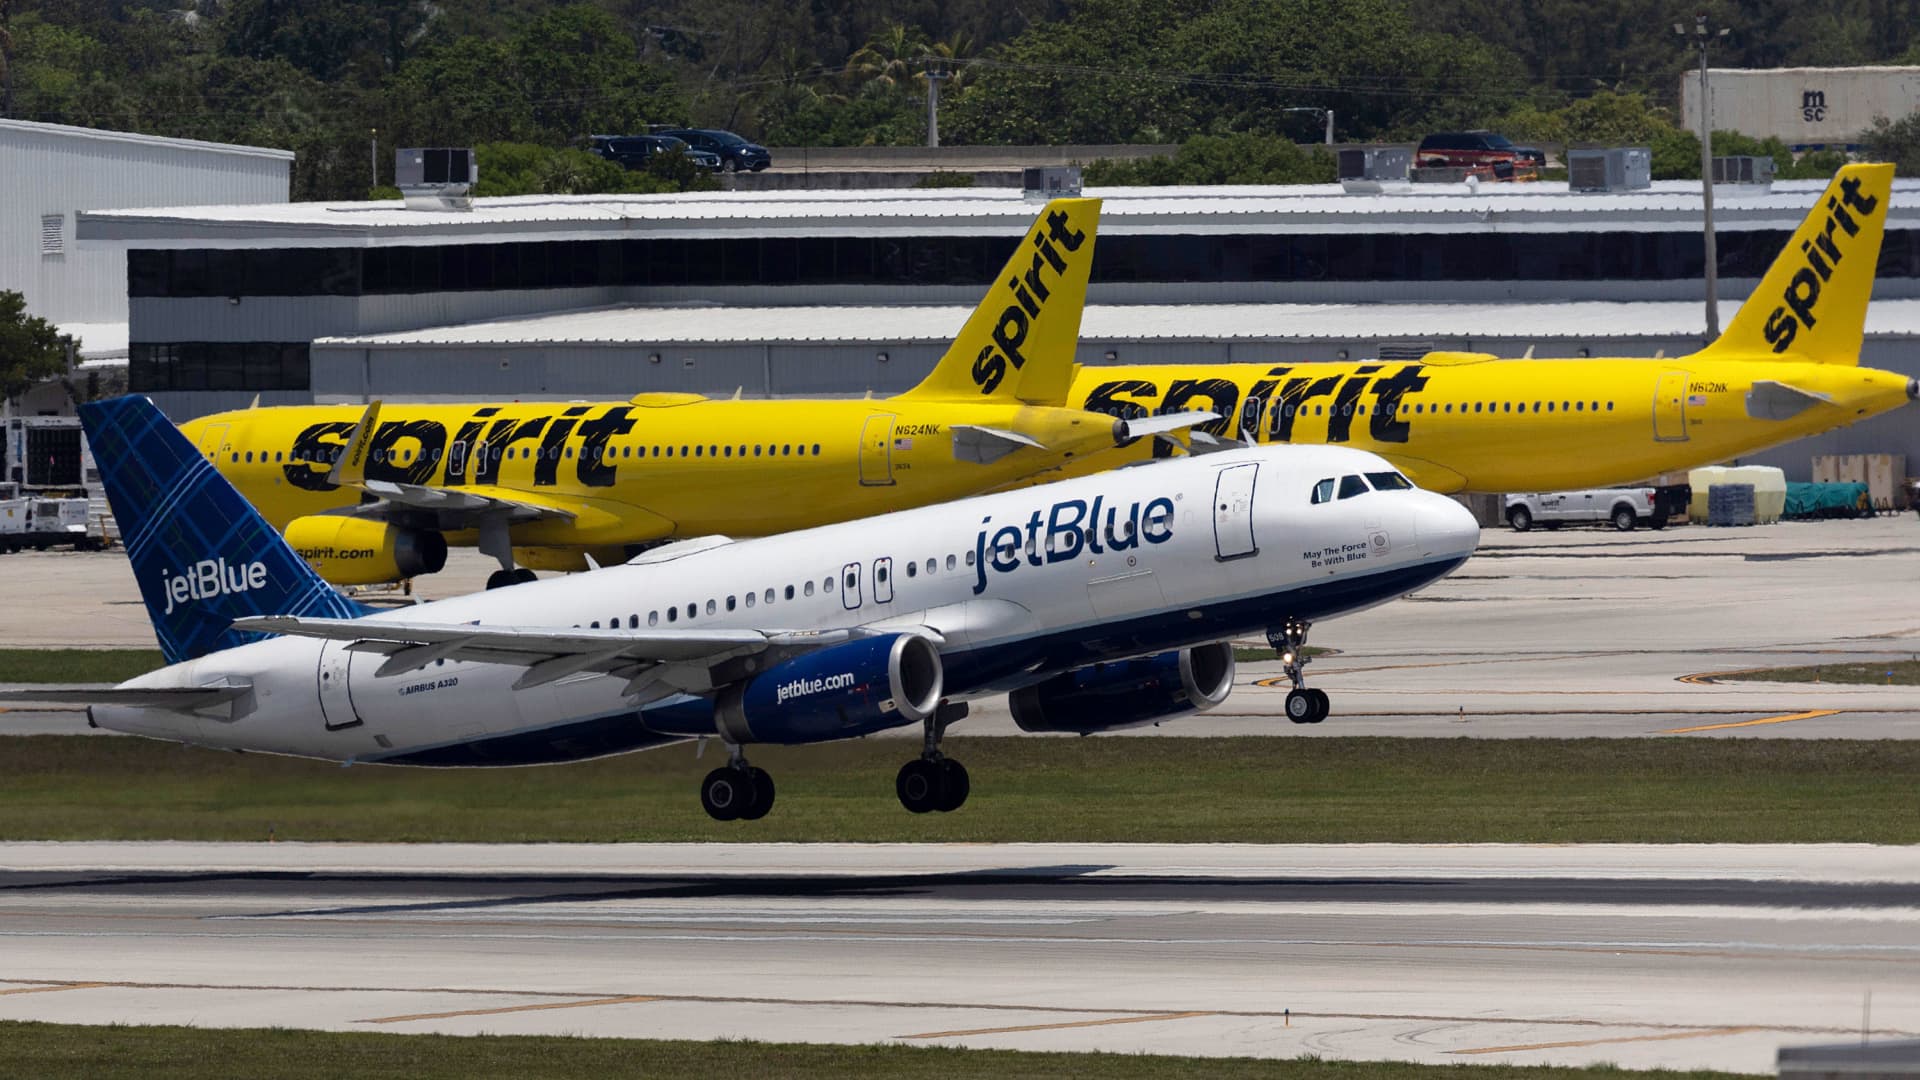 Spirit Airlines shareholder meeting postponed to continue Frontier, JetBlue deal talks